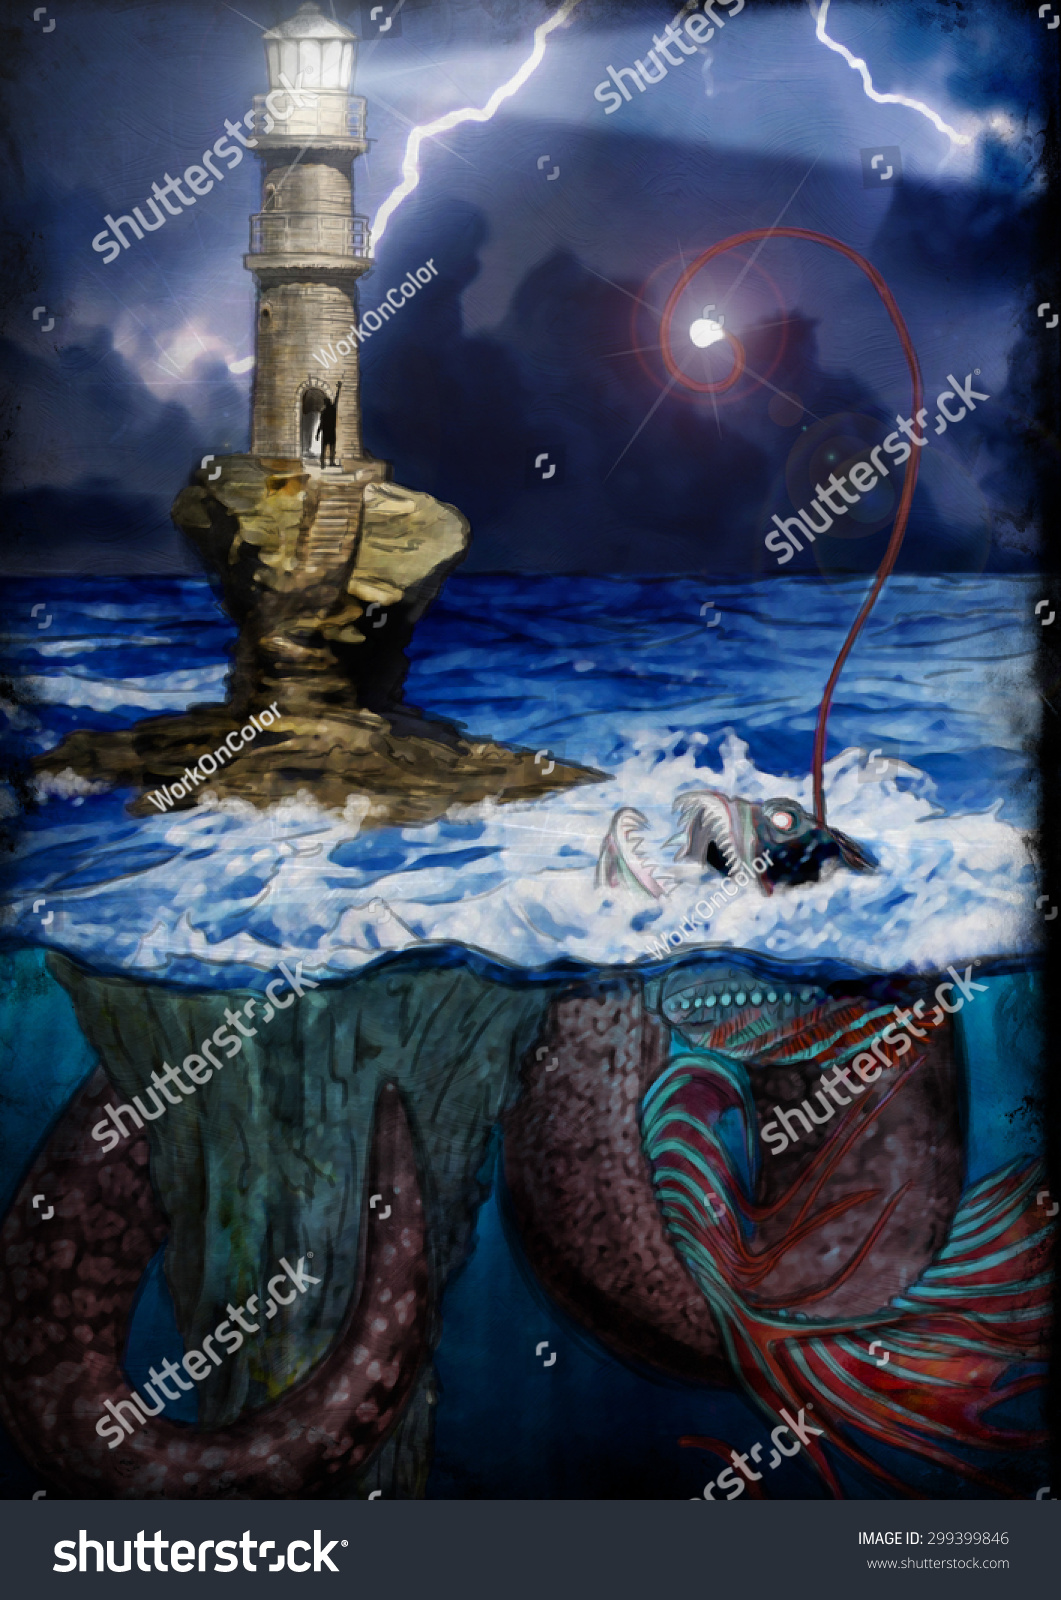 Summoning Dark Shadow Lighthouse Calling Leviathan Stock Illustration 299399846 Great backgrounds and photo backgrounds for design and adobe photoshop textures fabric 60 jpeg, 2480x3508 px. https www shutterstock com image illustration summoning dark shadow lighthouse calling leviathan 299399846